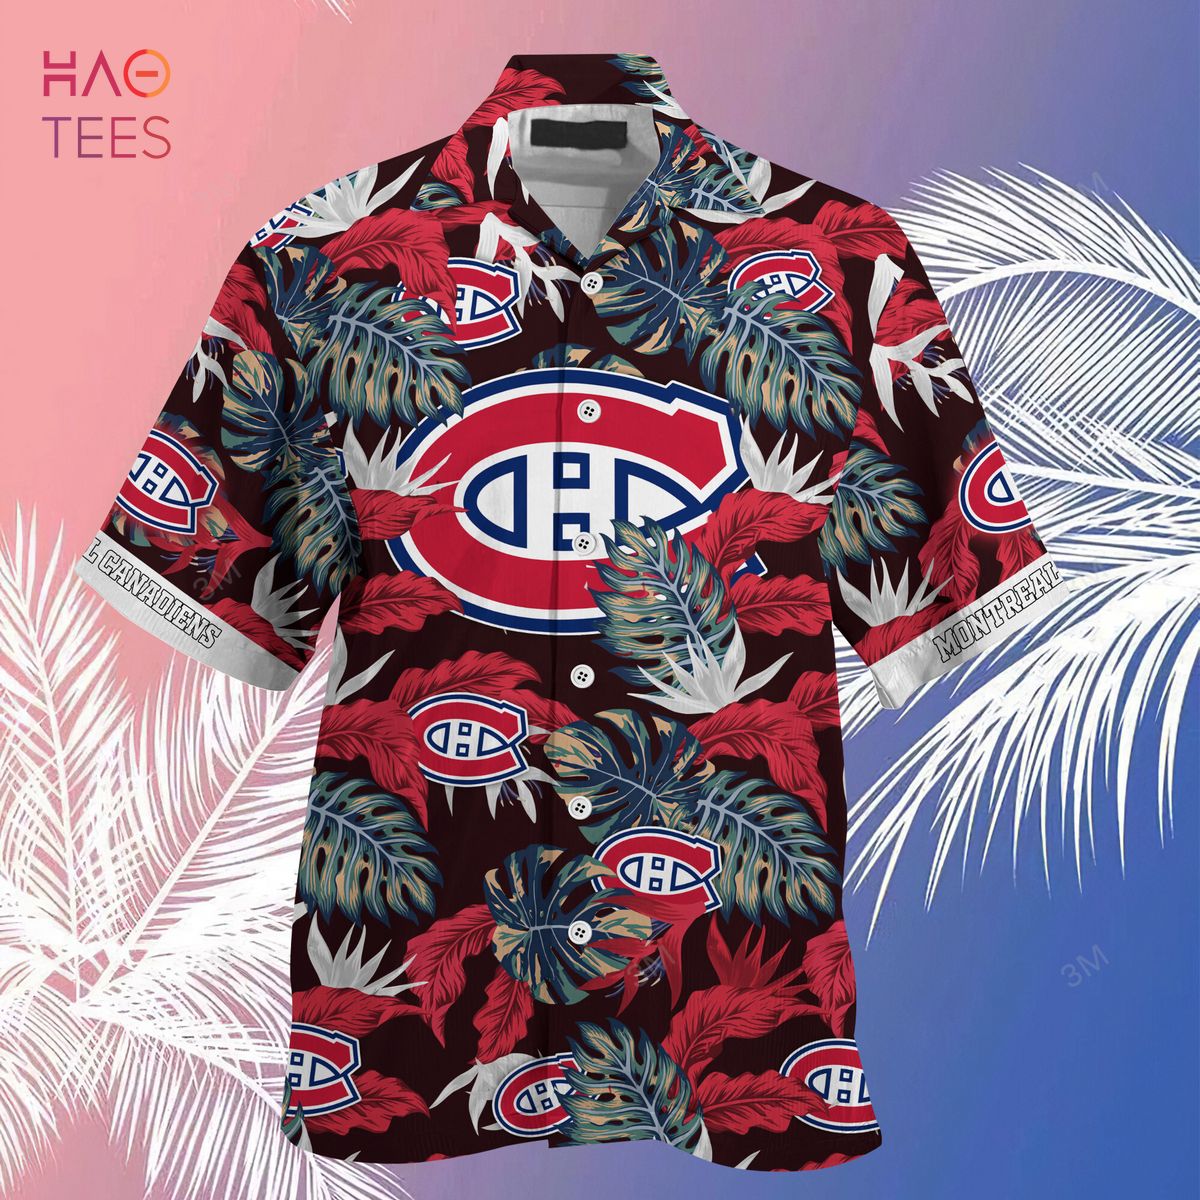 Nhl Montreal Canadiens Jersey Concepts 3D Hockey Jersey Limited Edition